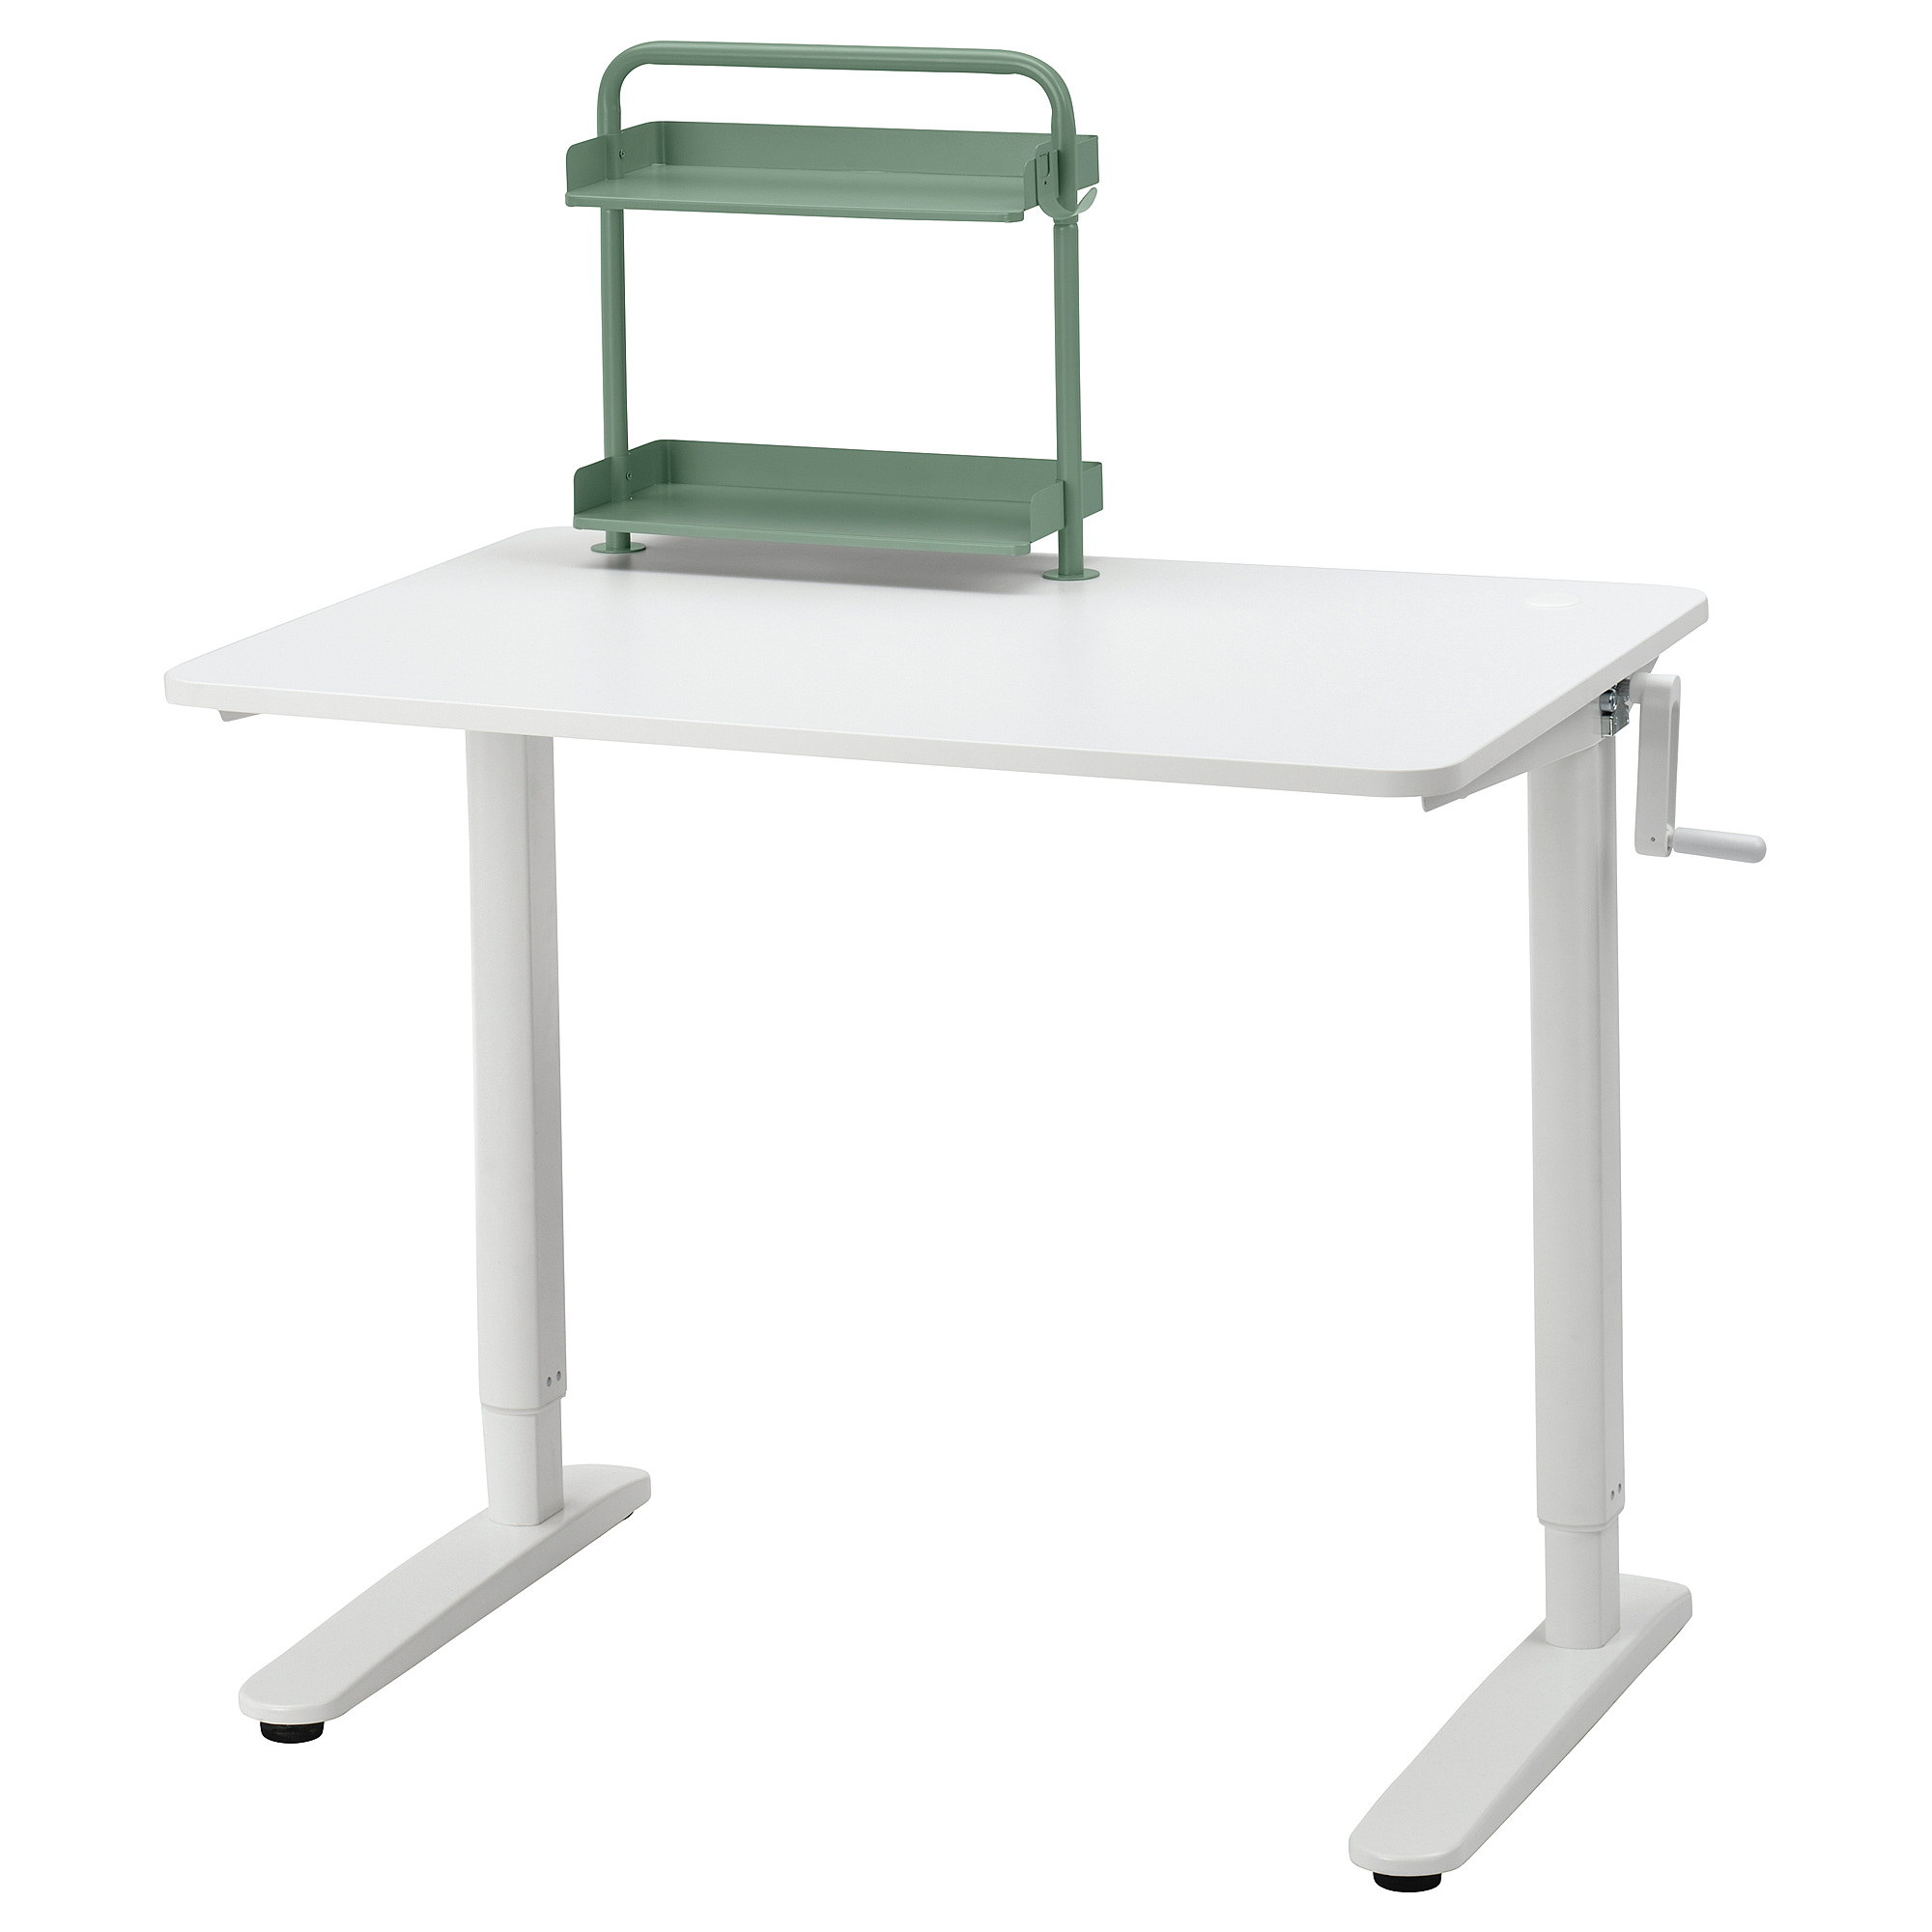 RELATERA desk combination sit/stand